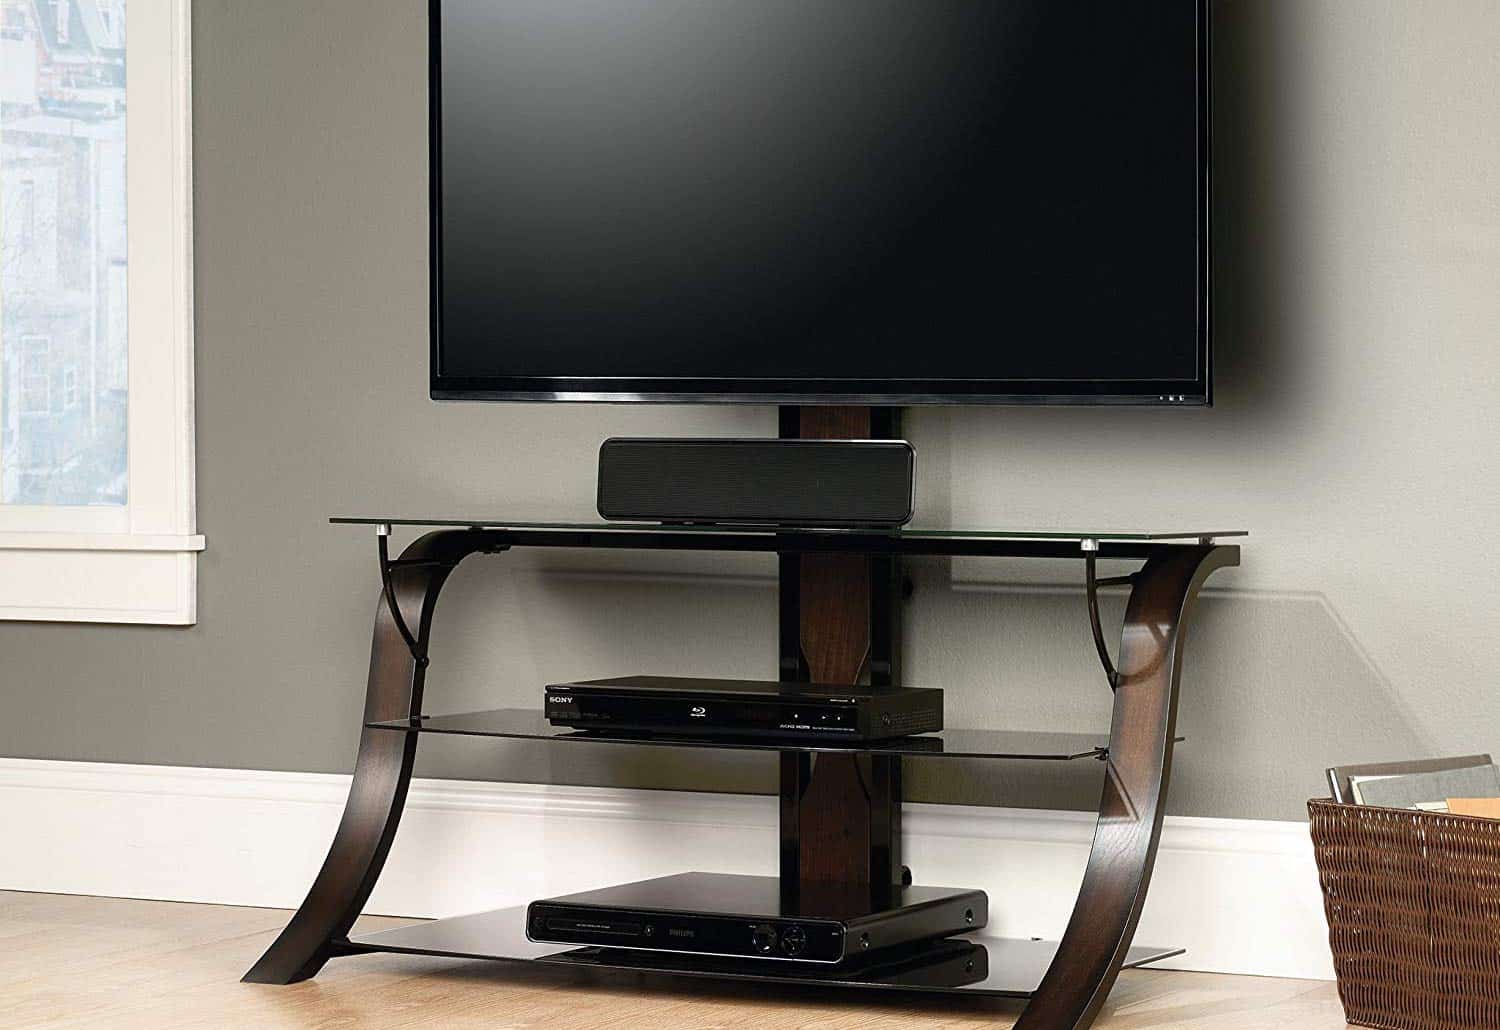 Top 10 Best TV Stand with Mounts in 2020 Reviews | Buyer's ...